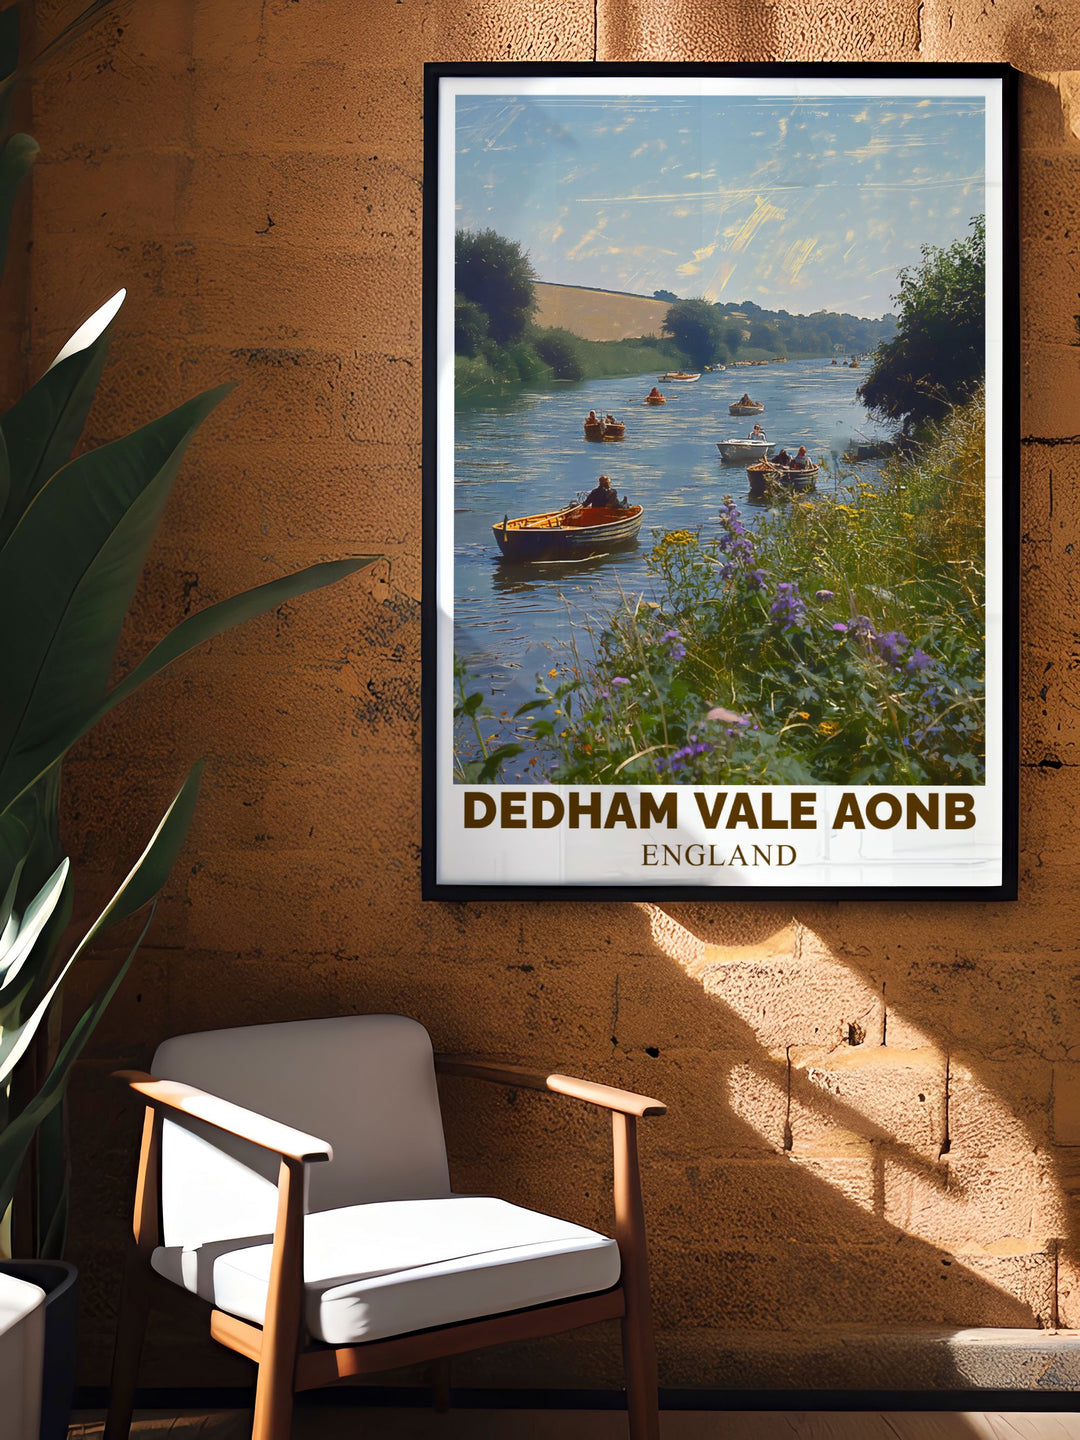 Framed art showcasing the serene views of the Natural Beauty River in Dedham Vale, capturing the natural splendor and cultural significance of this iconic region.